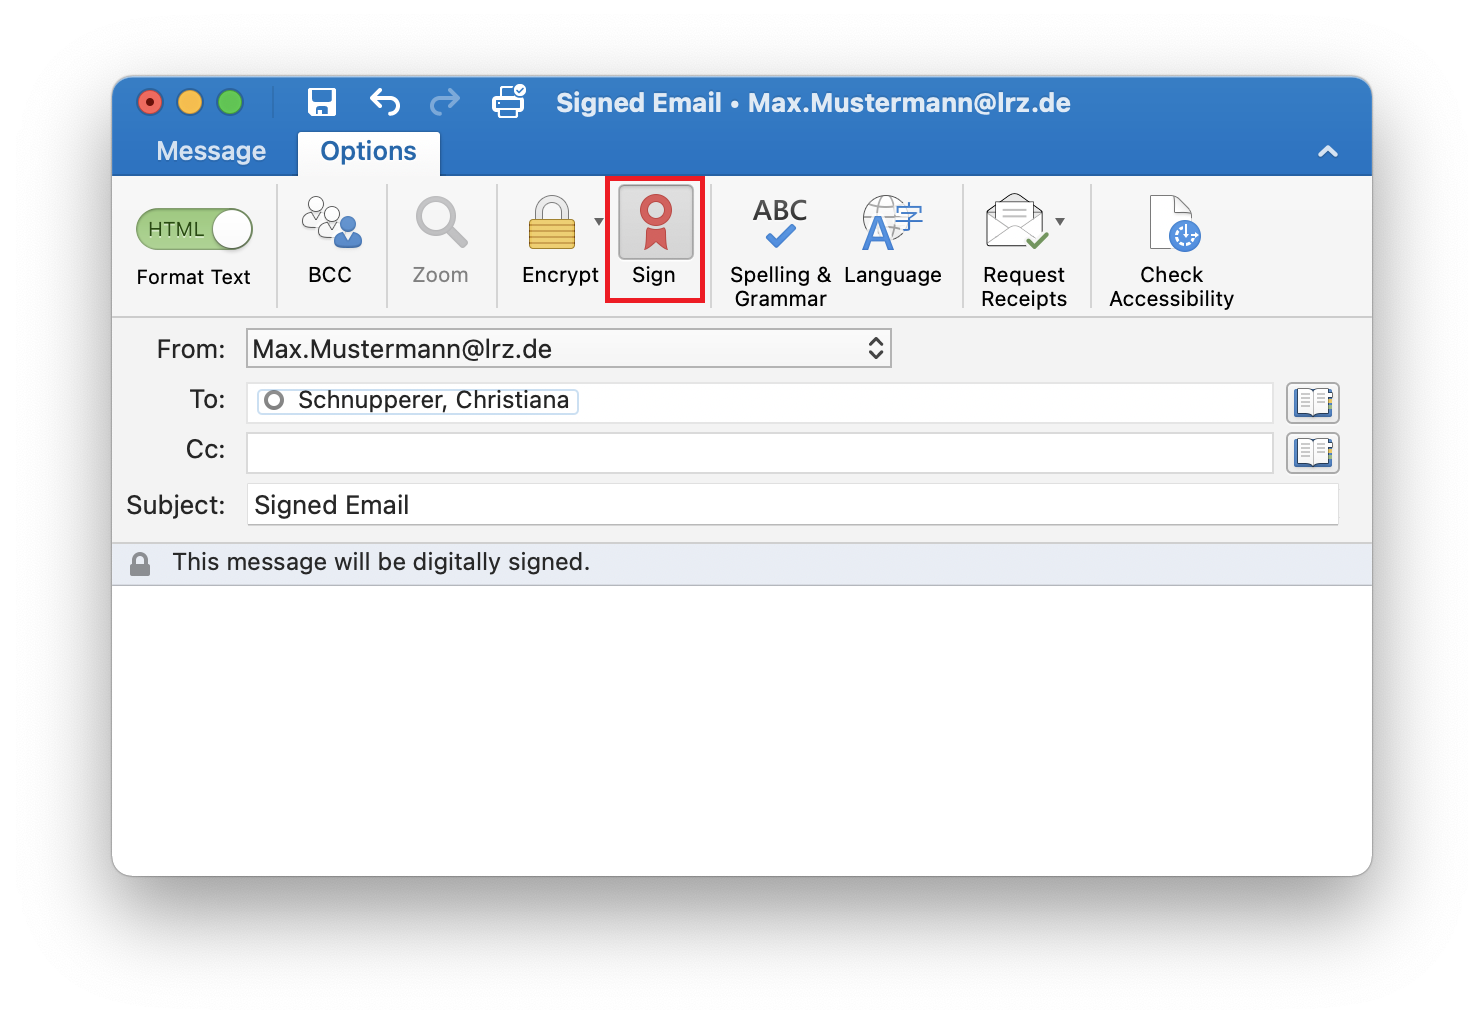 Window Signed Email - Max.Mustermann At lrz.de. Message tabs, selected Options. In the command bar marked Sign. Below the information from the message header a bar, symbol Lock, This message will be digitally signed.